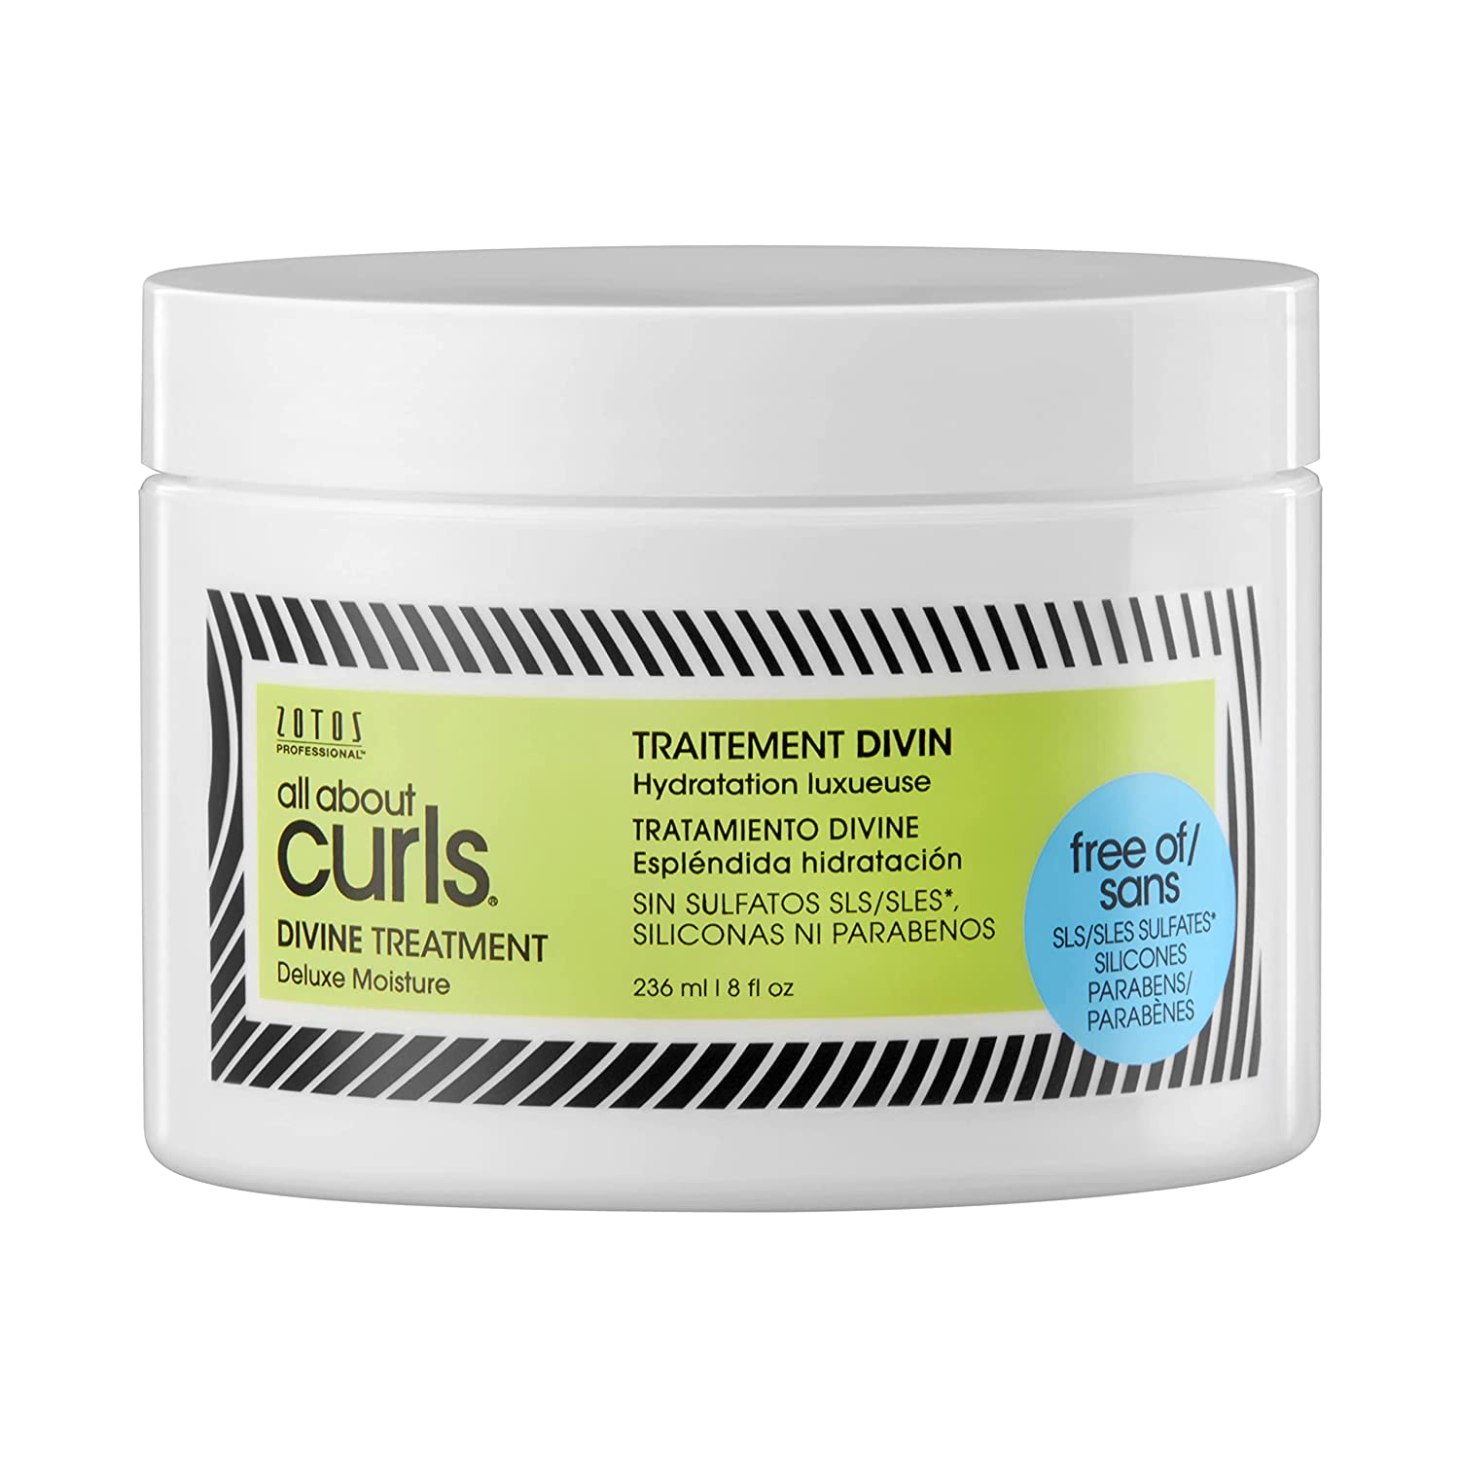 all about curls divine treatment, one of the best conditioners for gray hair